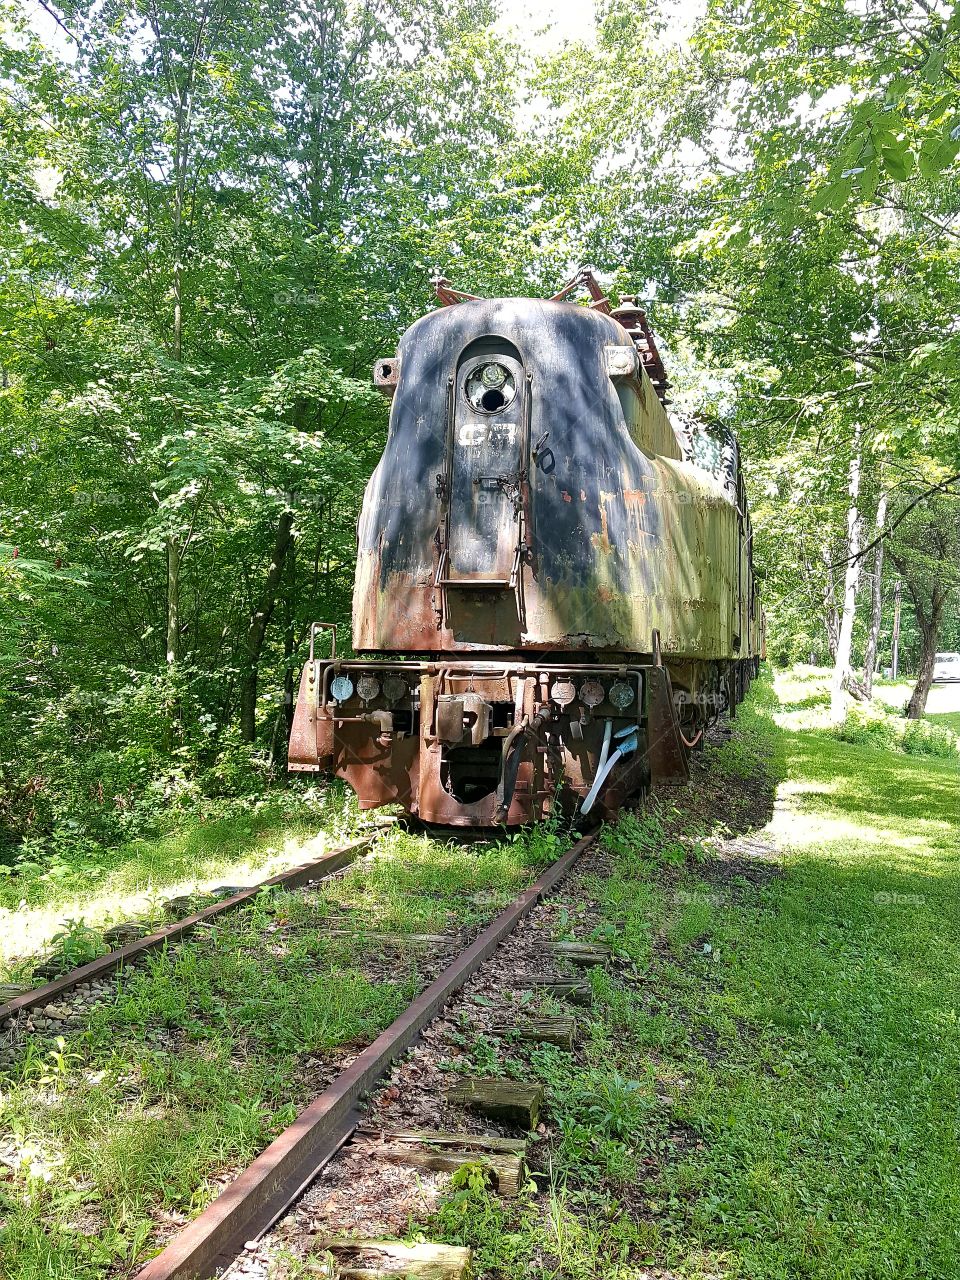 Train from the past